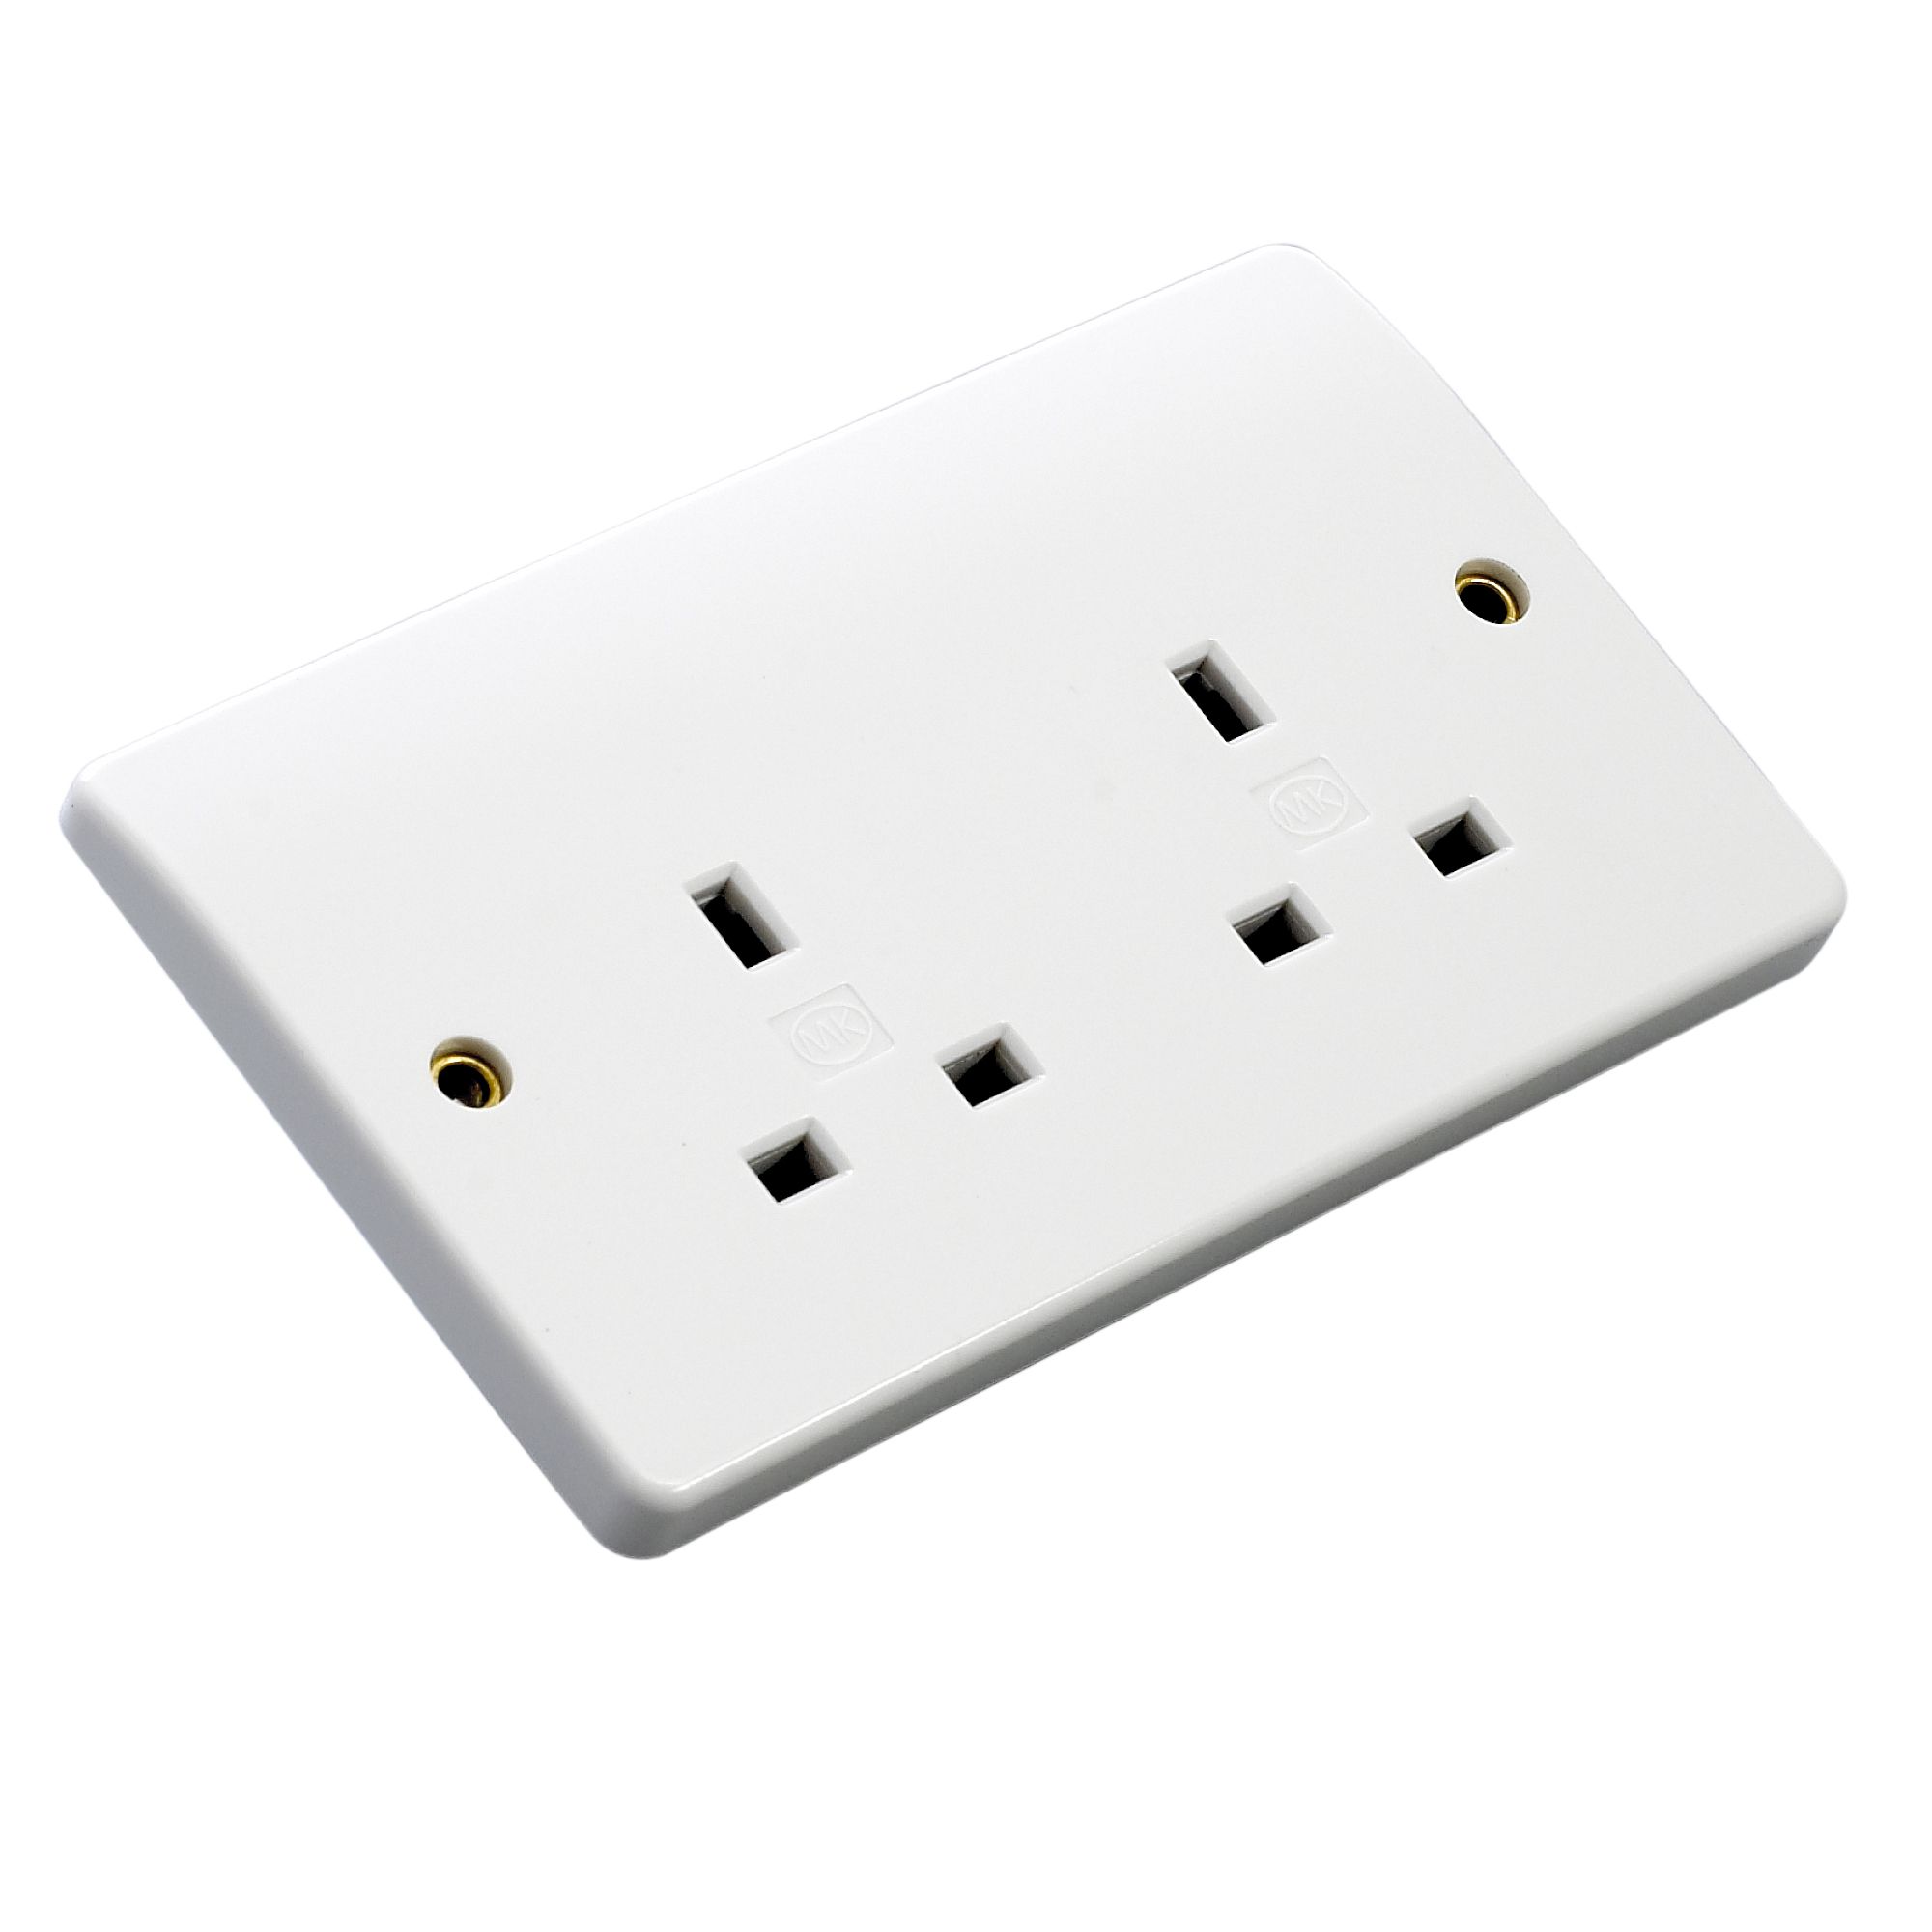 MK White 13A Unswitched socket